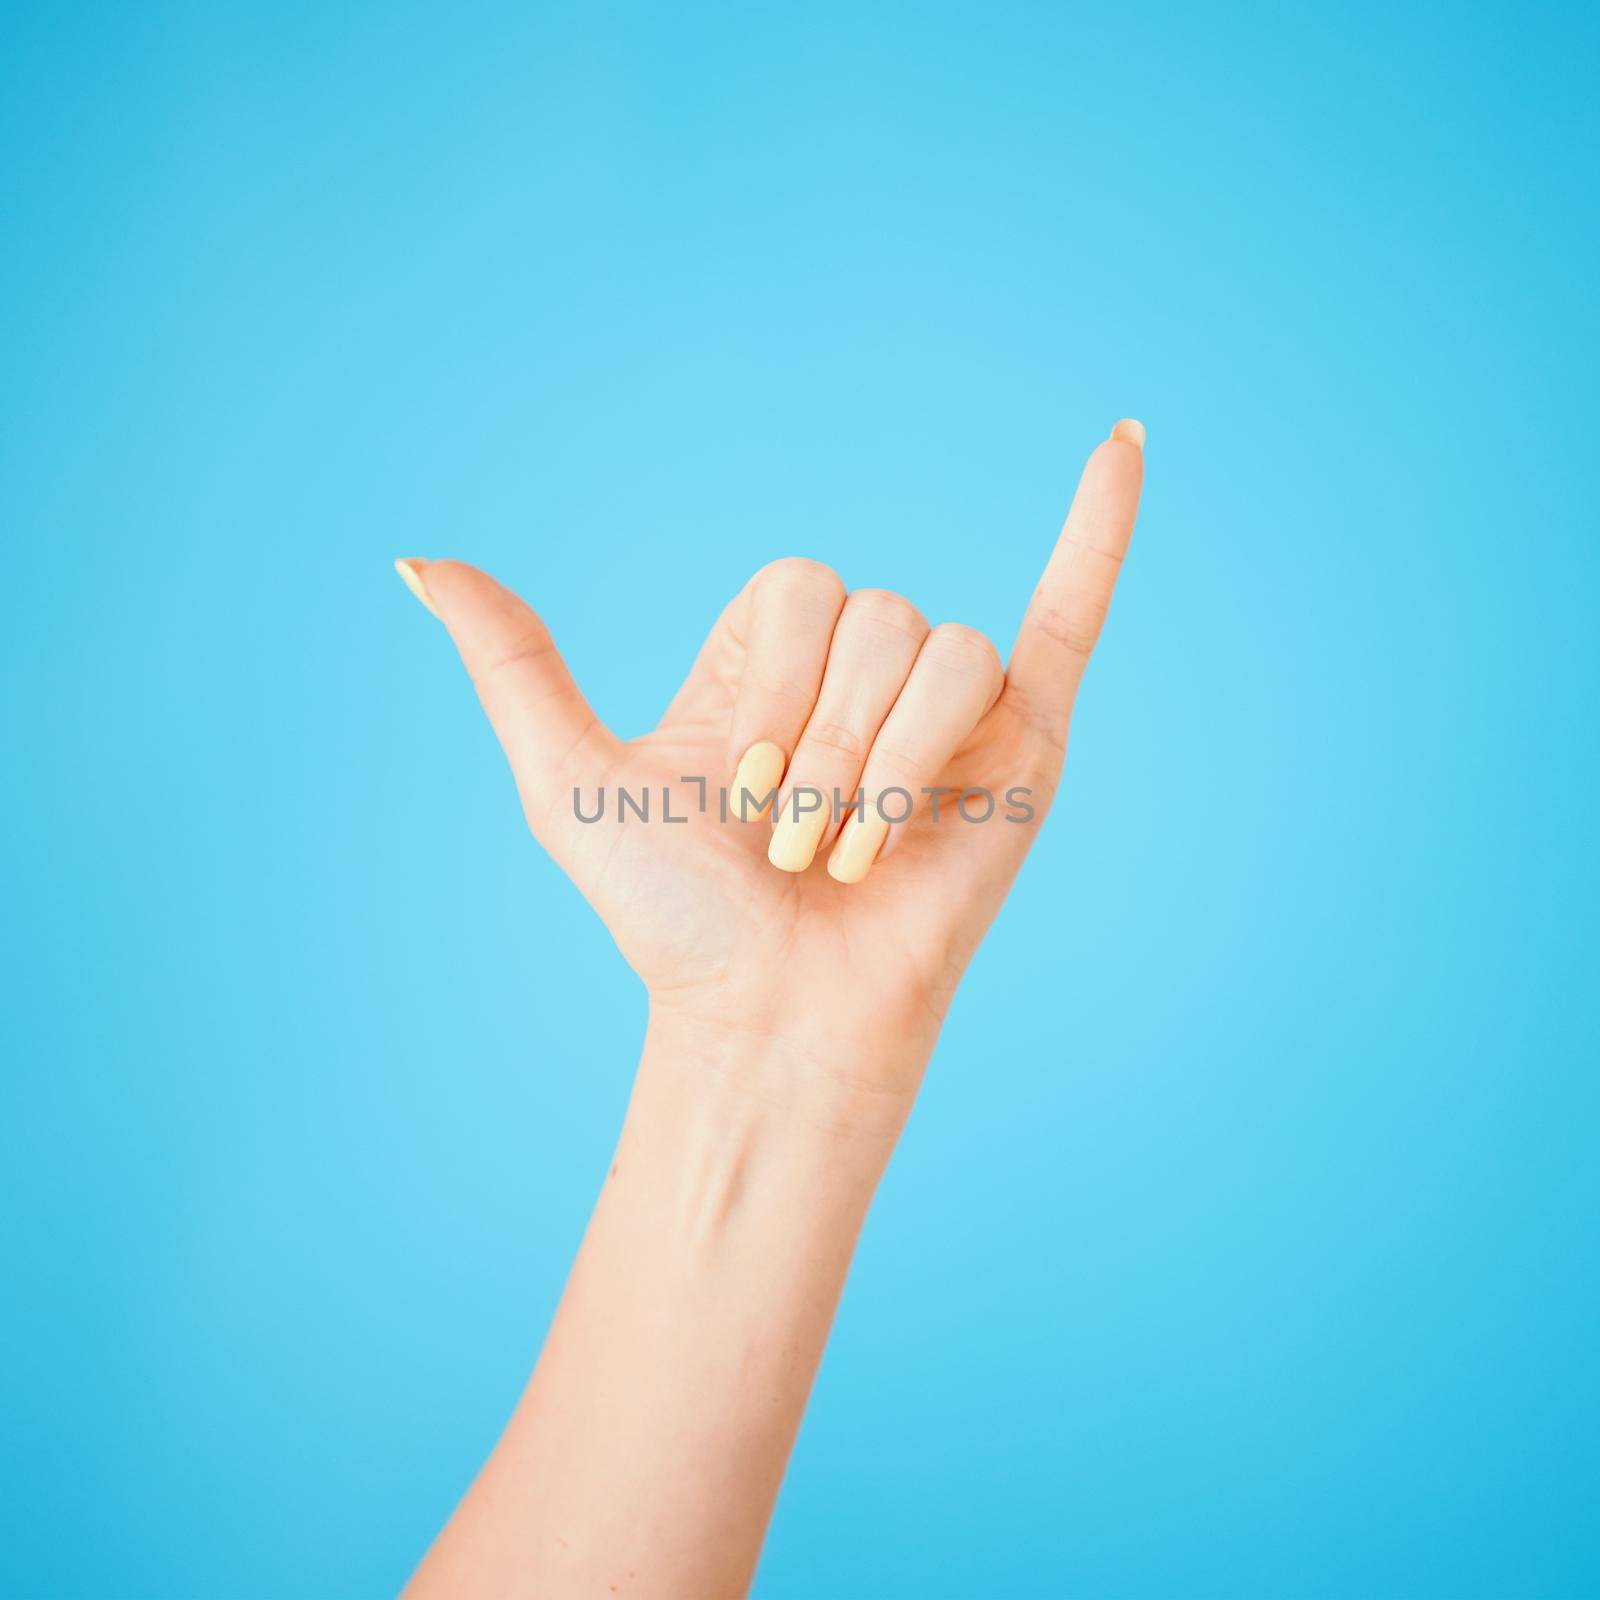 Studio shot of an unrecognisable woman showing a shaka hand sign against a blue background.